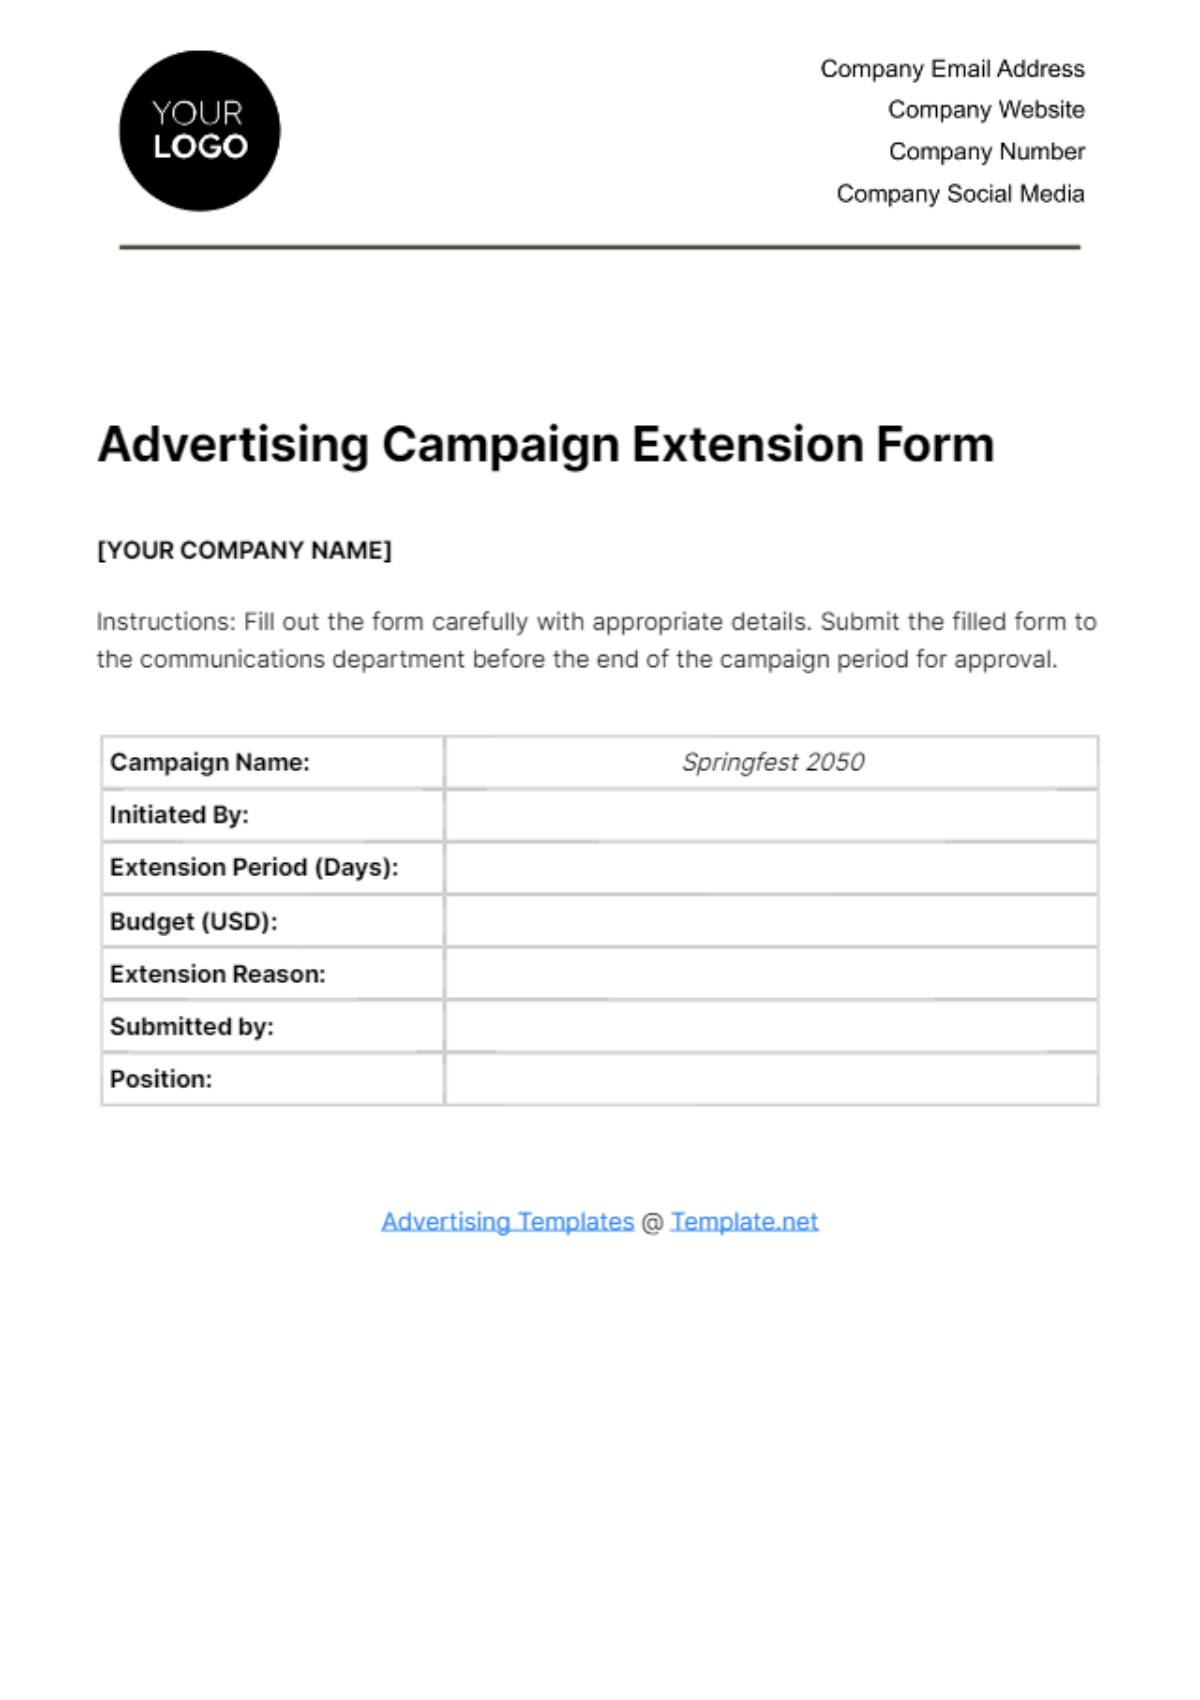 Free Advertising Campaign Extension Form Template